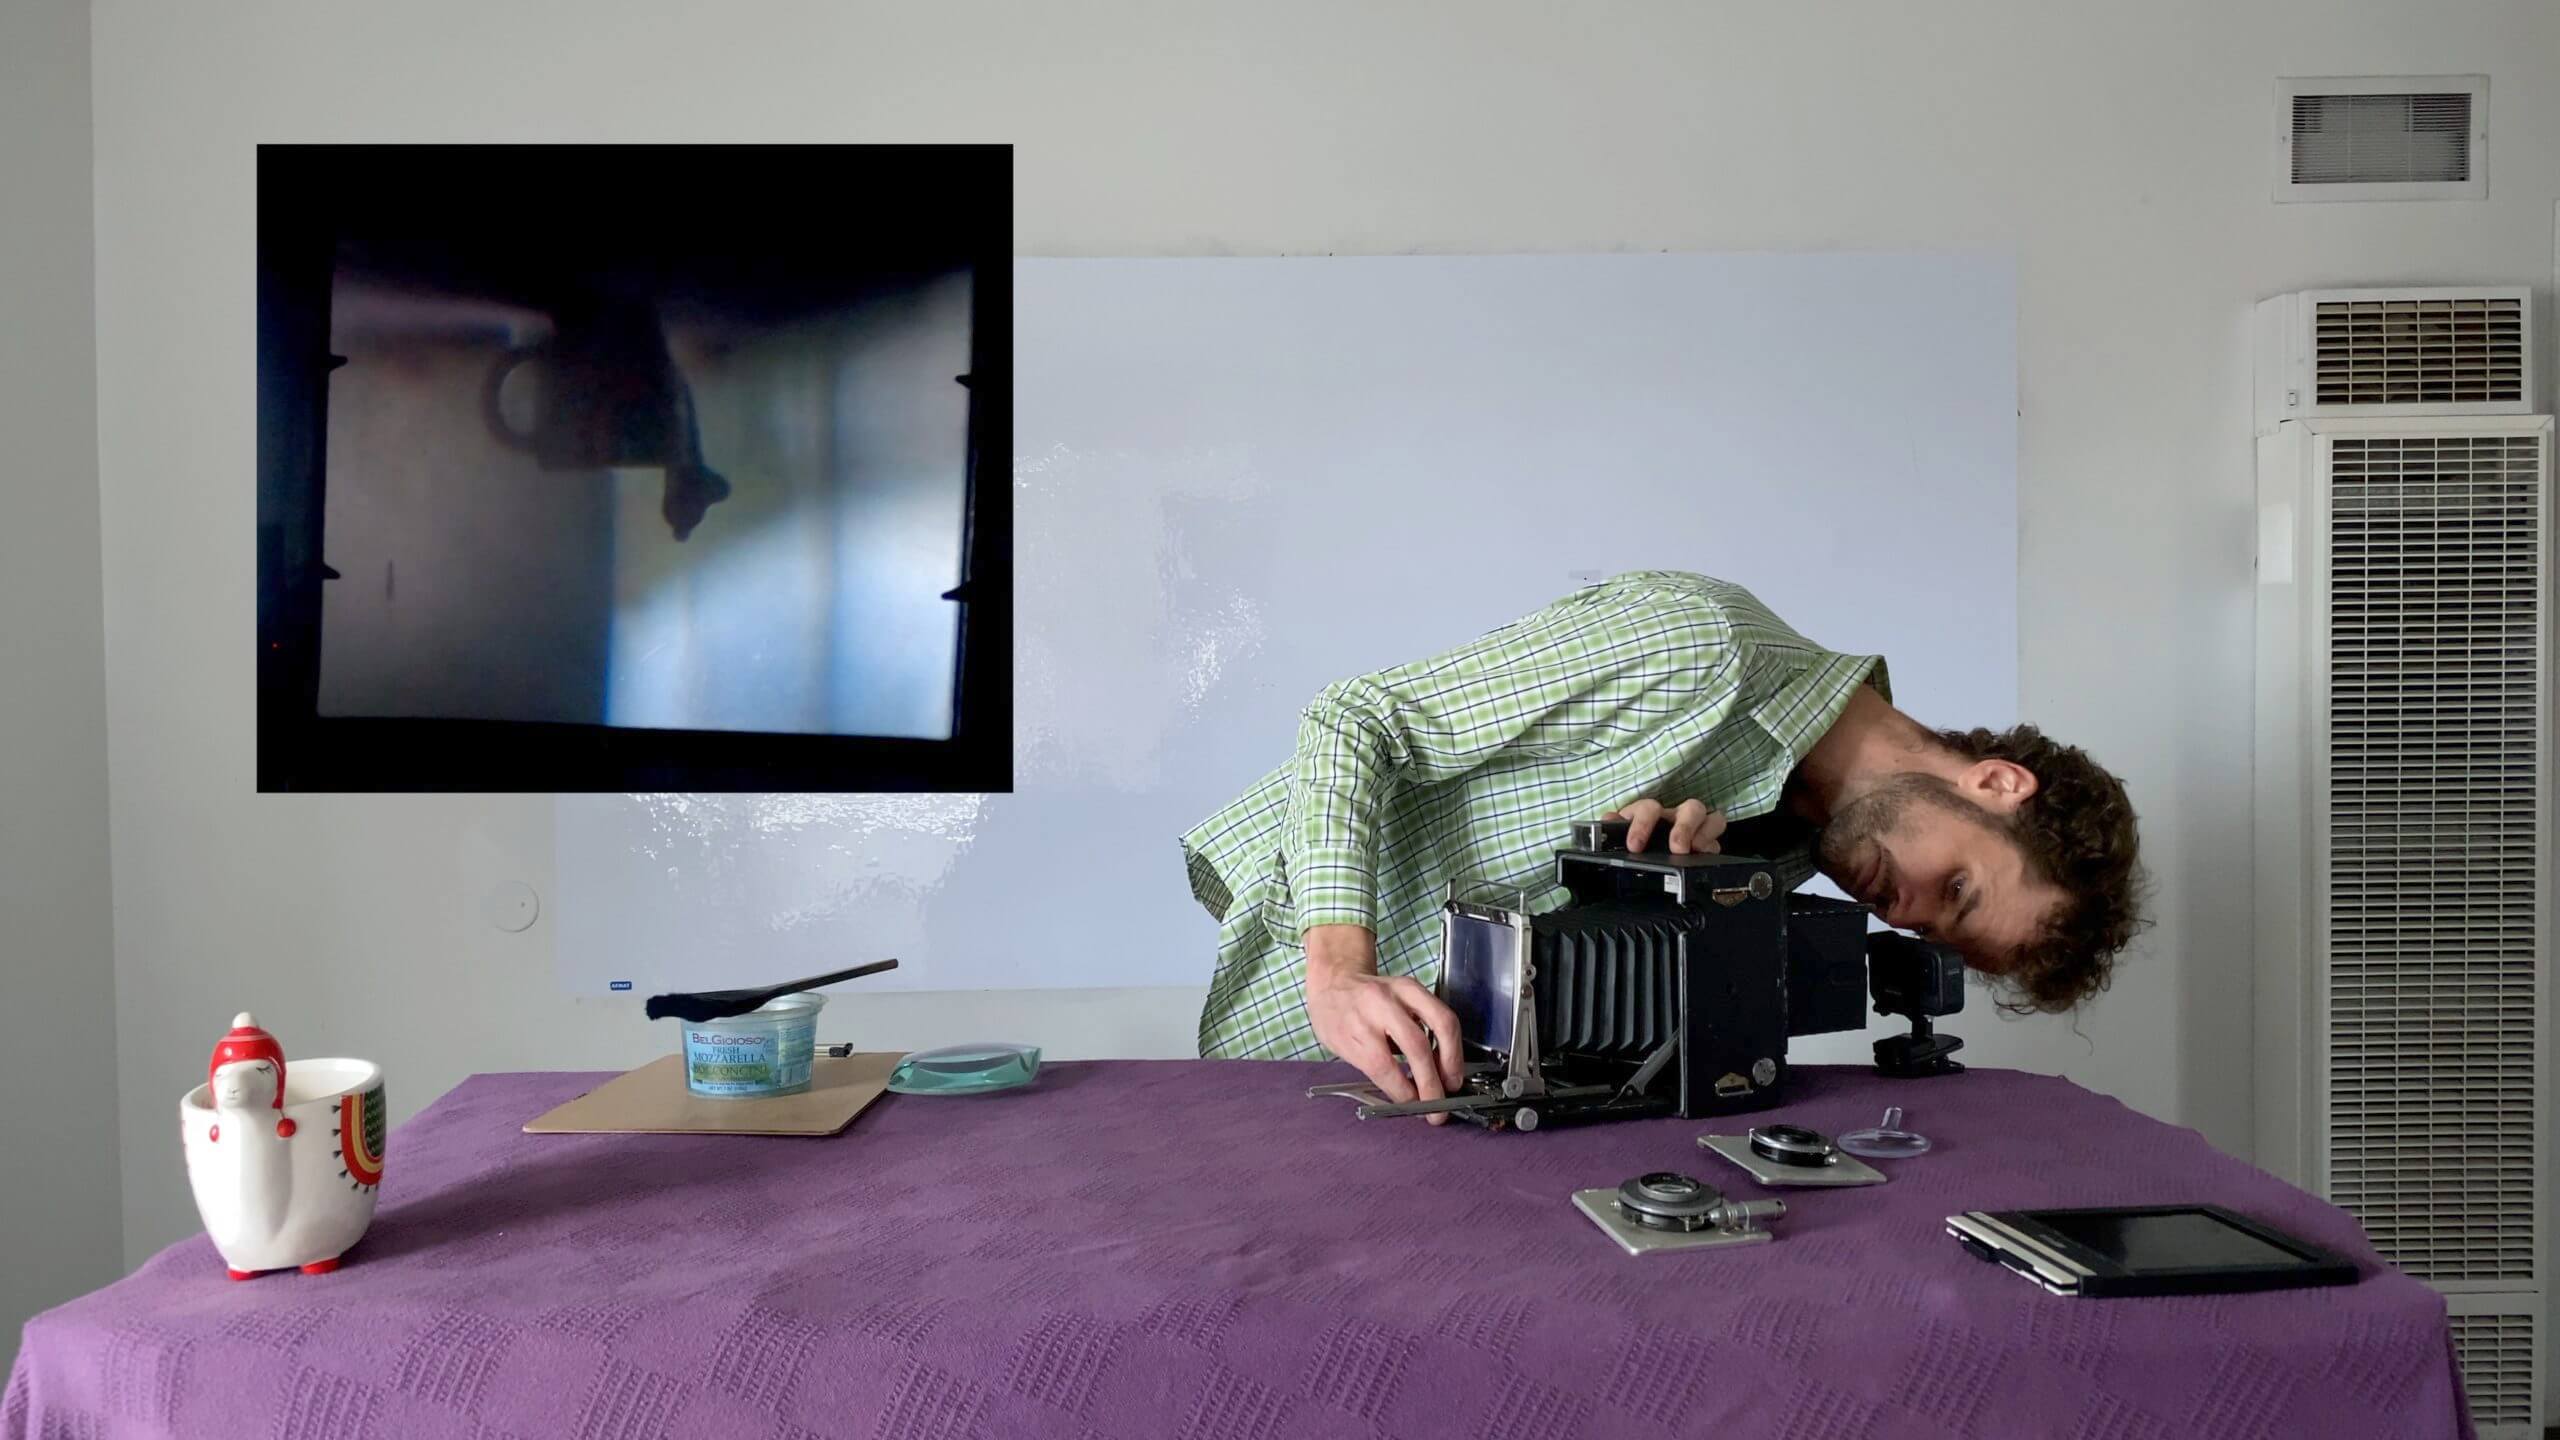 Using a Plastic Fresnel Lens to Focus an image on a large format camera